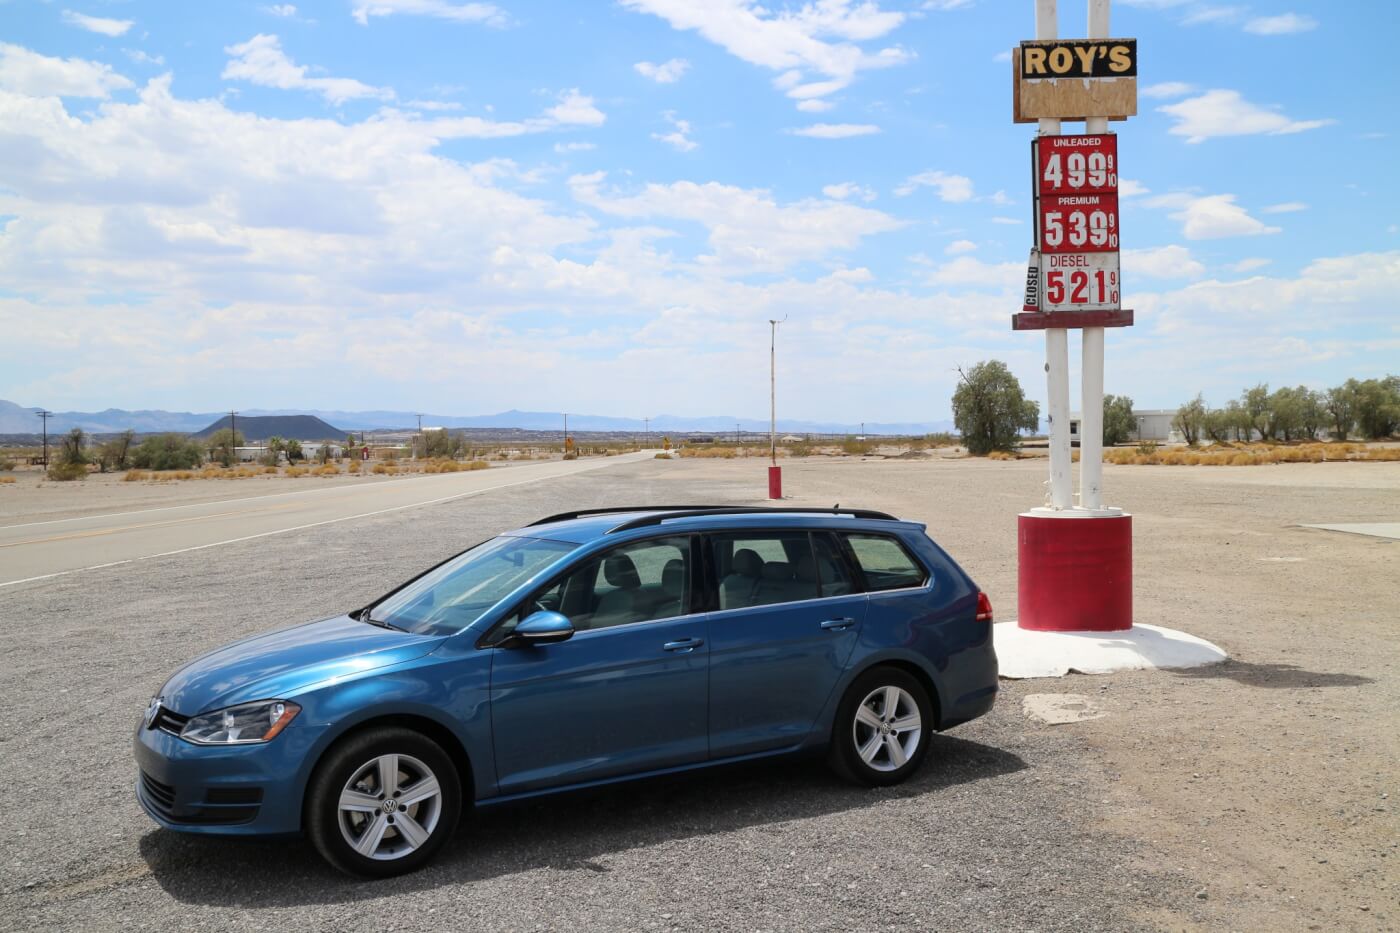 In our travels, testing mileage on desert back roads, we found what might be the most expensive diesel fuel in California. This lone station in the middle of the Mojave Desert is the only game in town…for miles around. However, with the amazing mileage of the TDI engine, we just stopped for a photo!